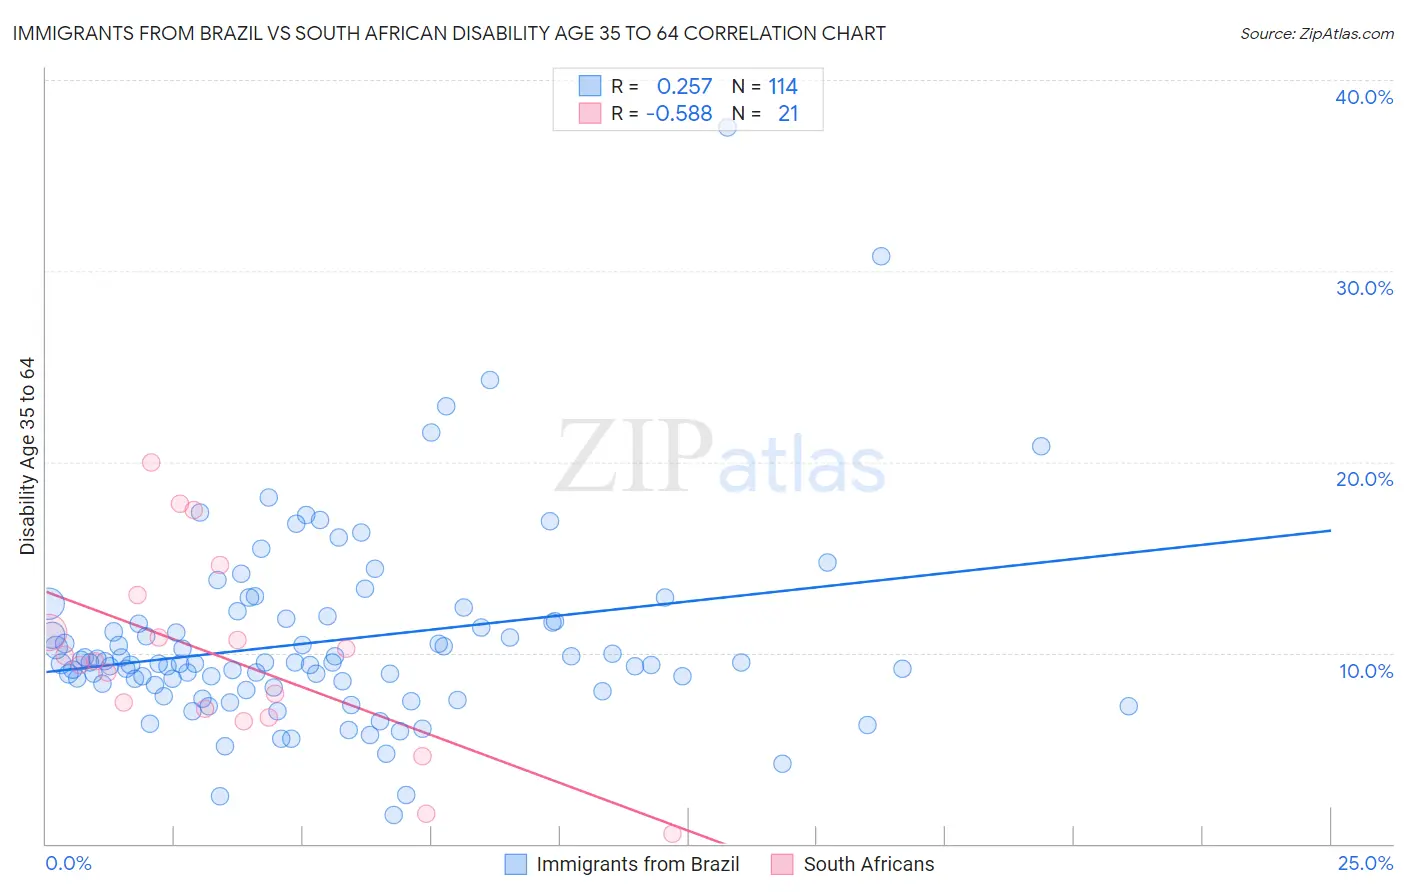 Immigrants from Brazil vs South African Disability Age 35 to 64